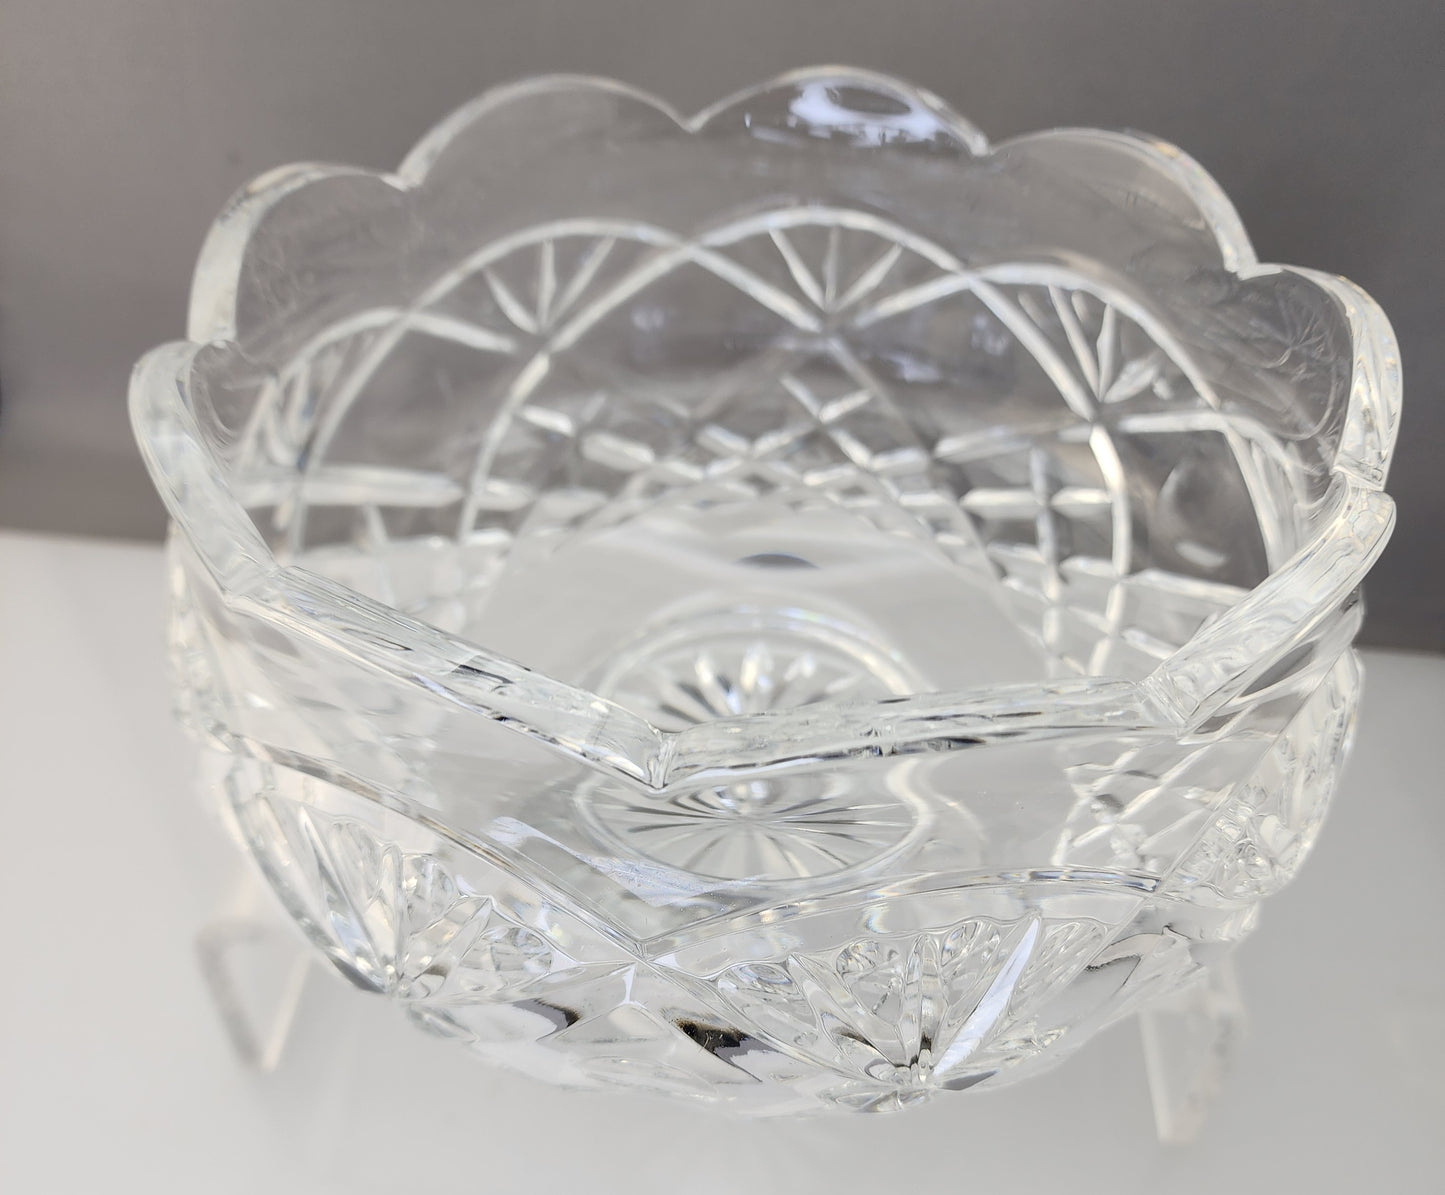 Signed Waterford CRYSTAL bowl b16